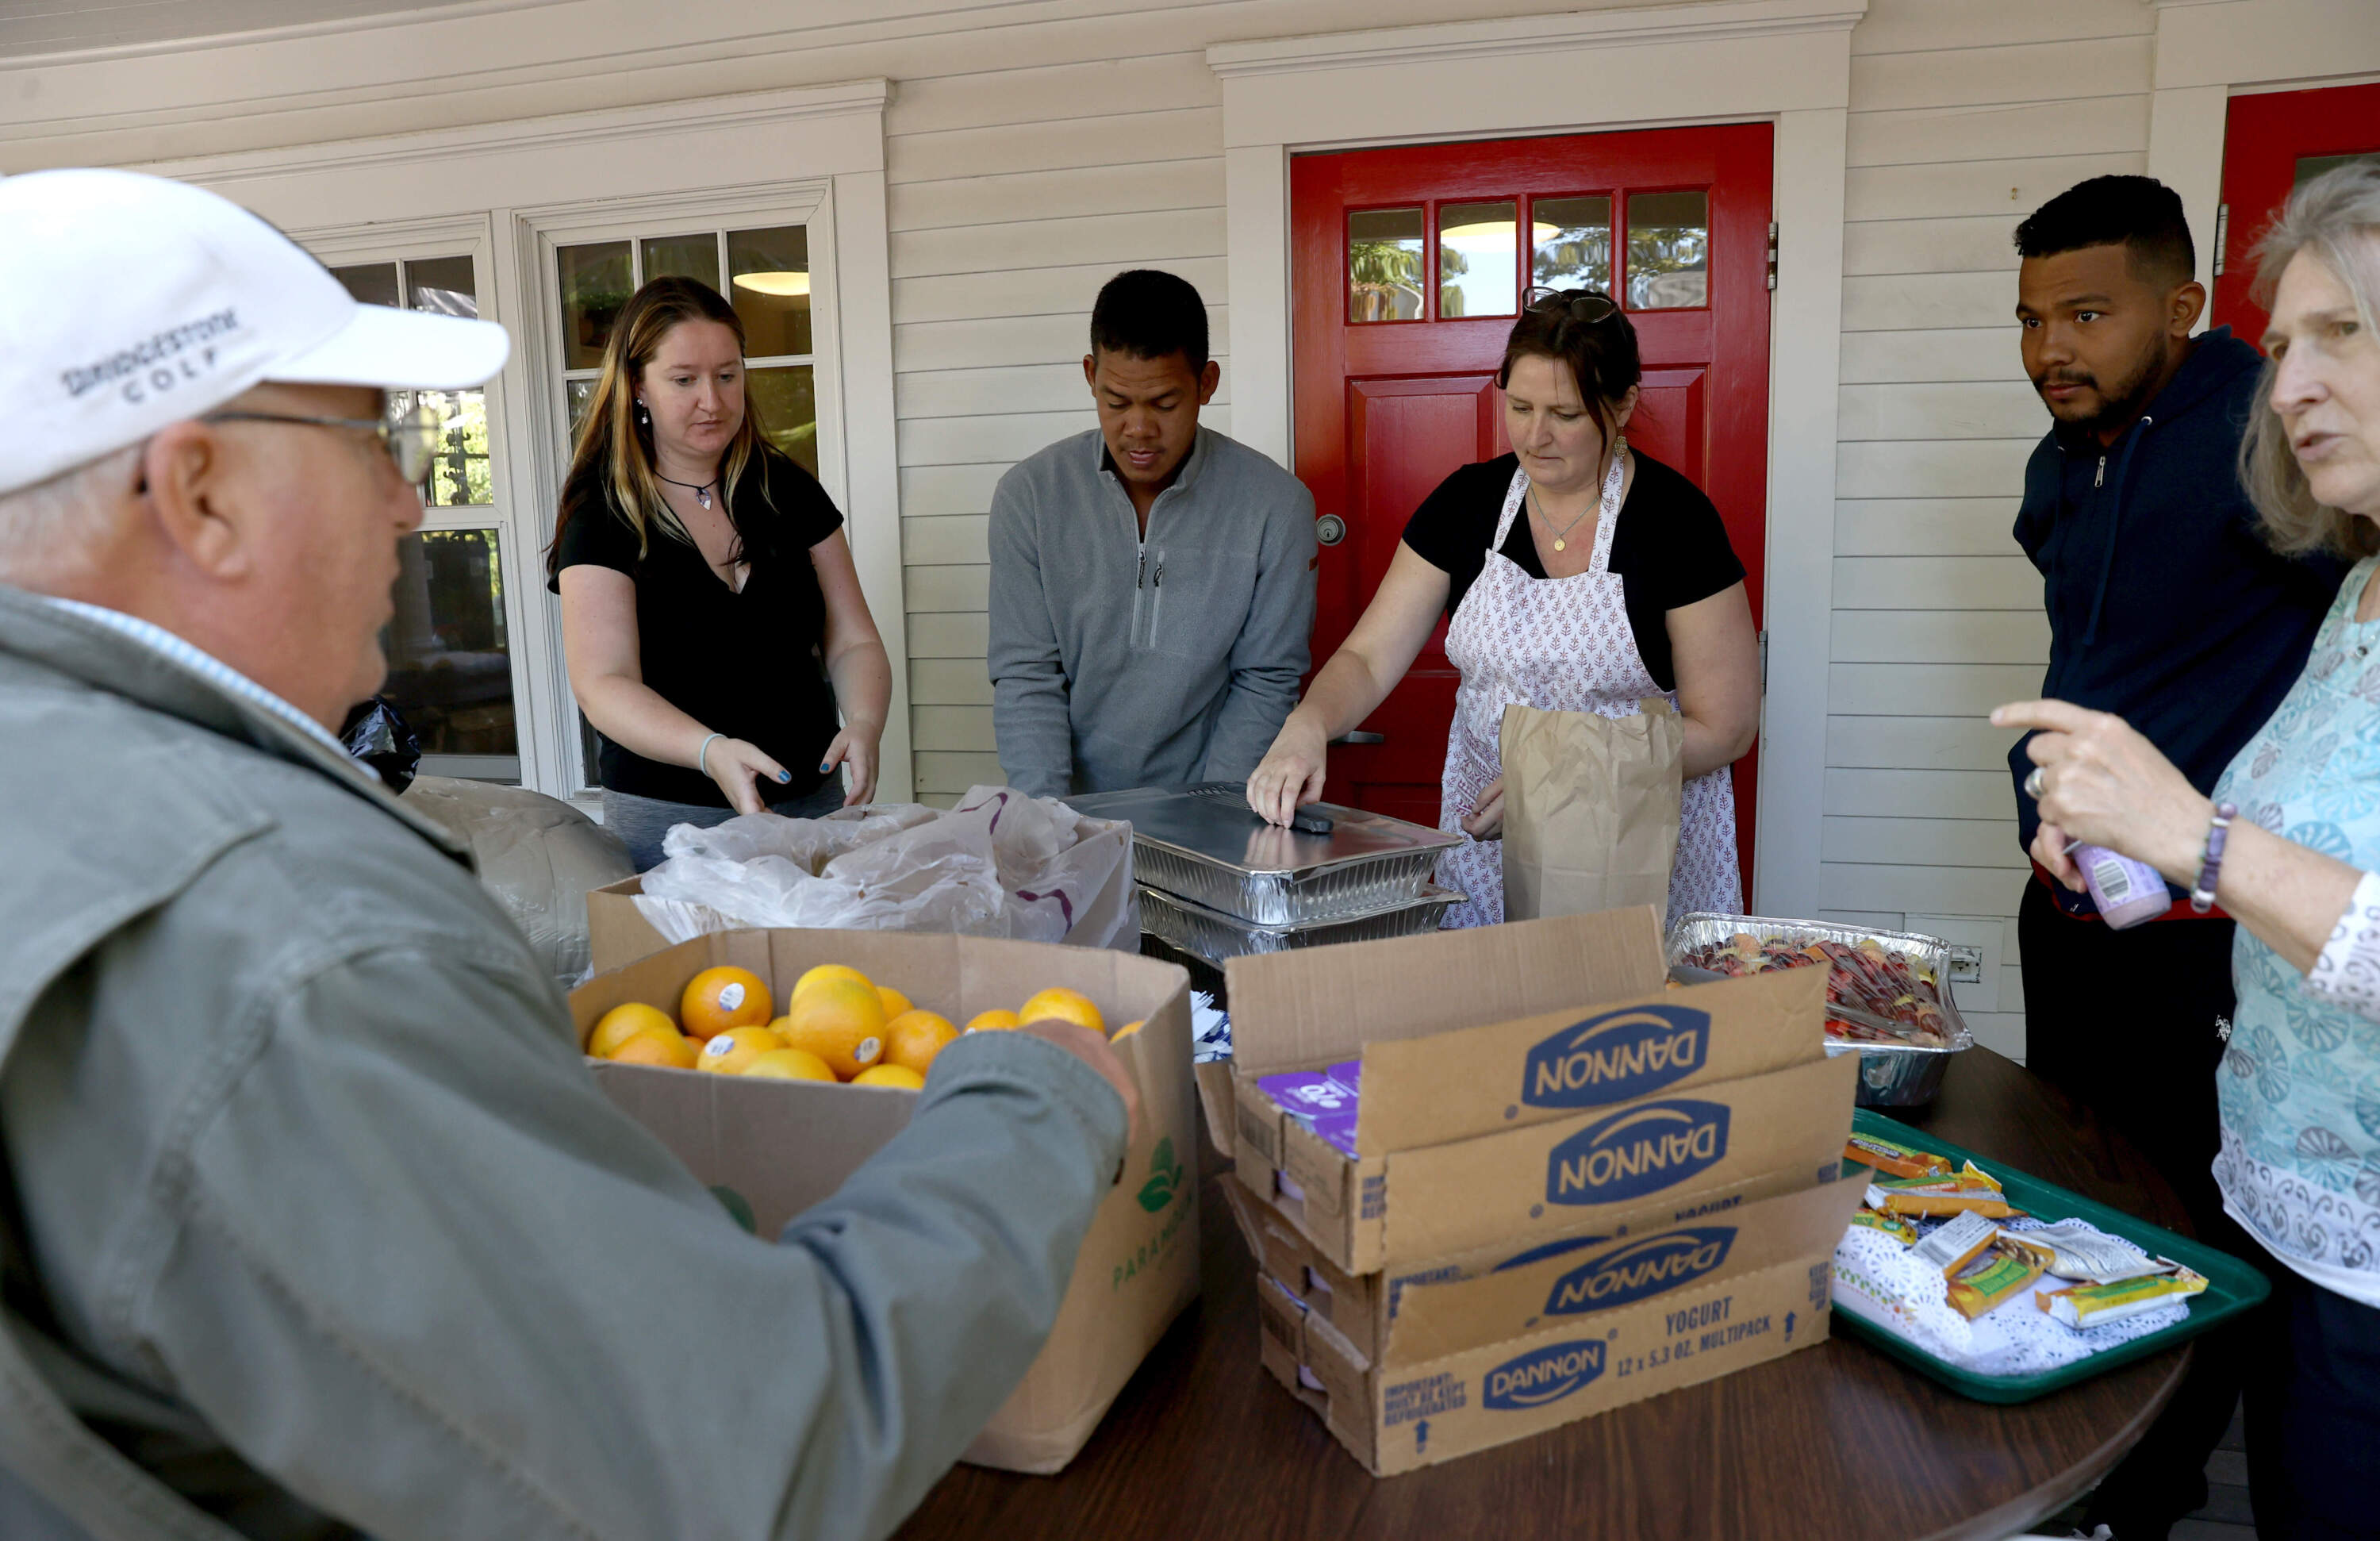 Volunteers helped serve food to the Venezuelans when they arrived on Martha's Vineyard. (Jonathan Wiggs/The Boston Globe via Getty Images)